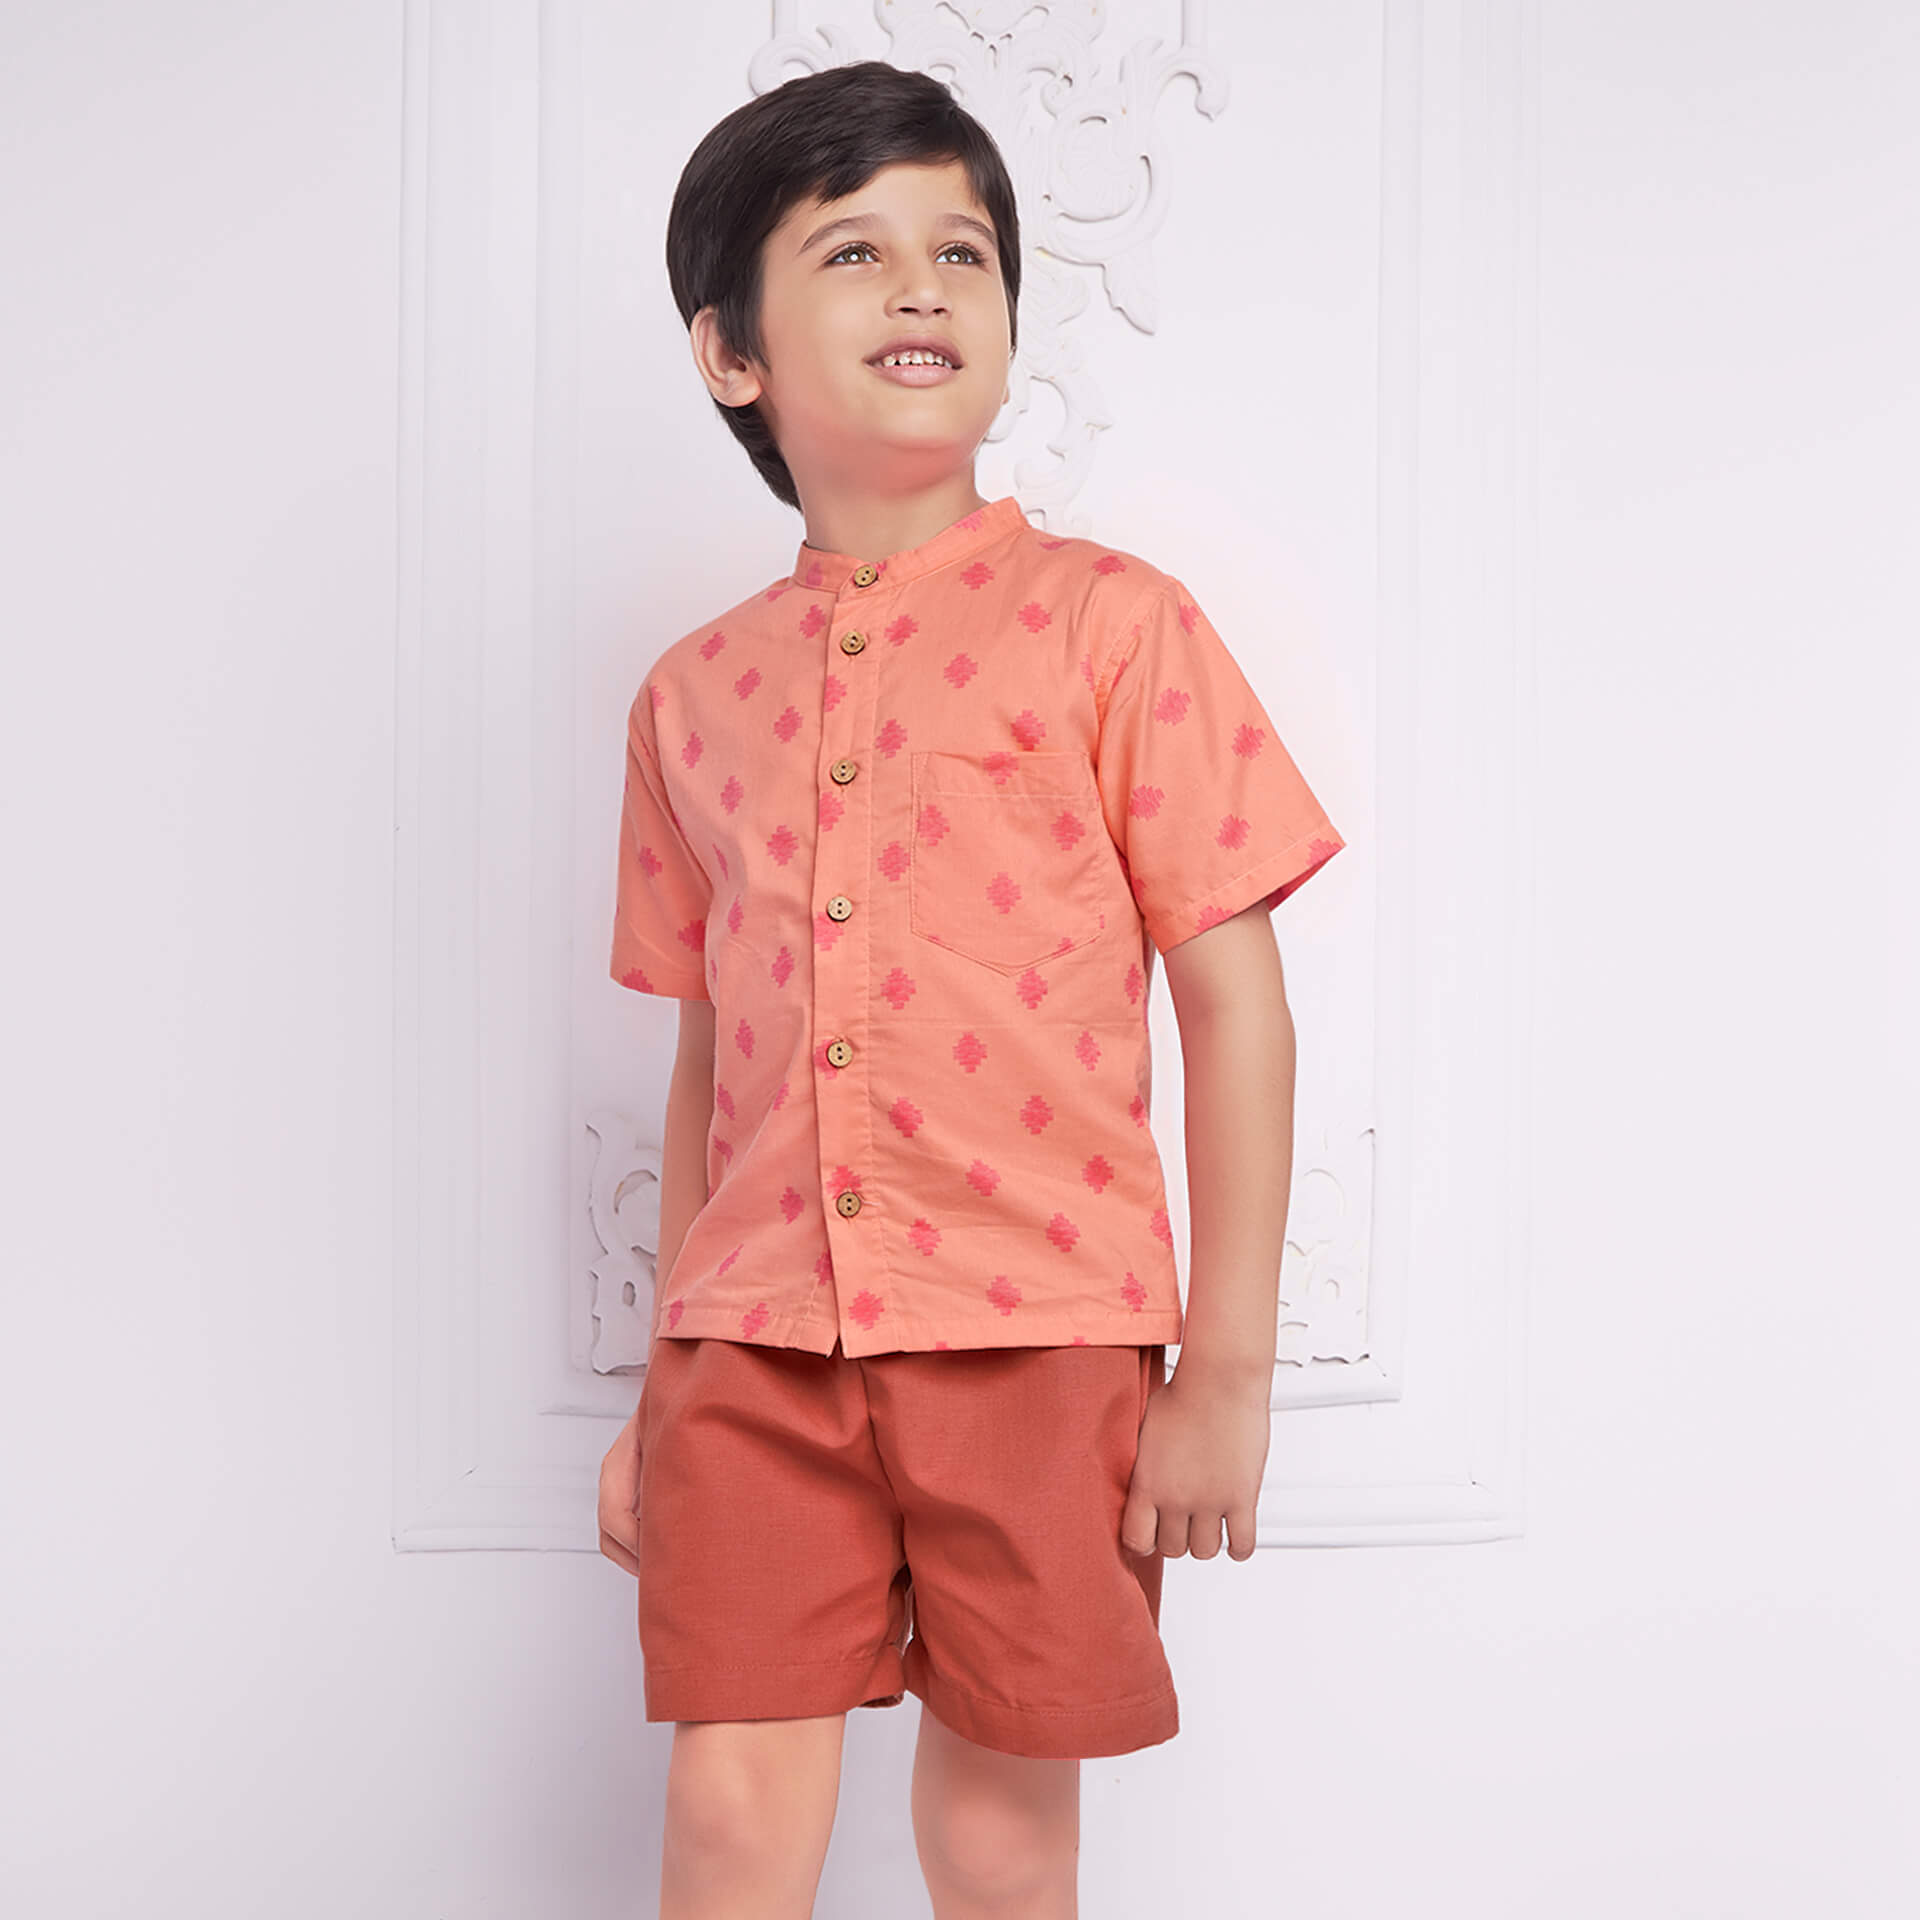 Boy wears peach printed shirt matched with rust shorts, both with pockets.